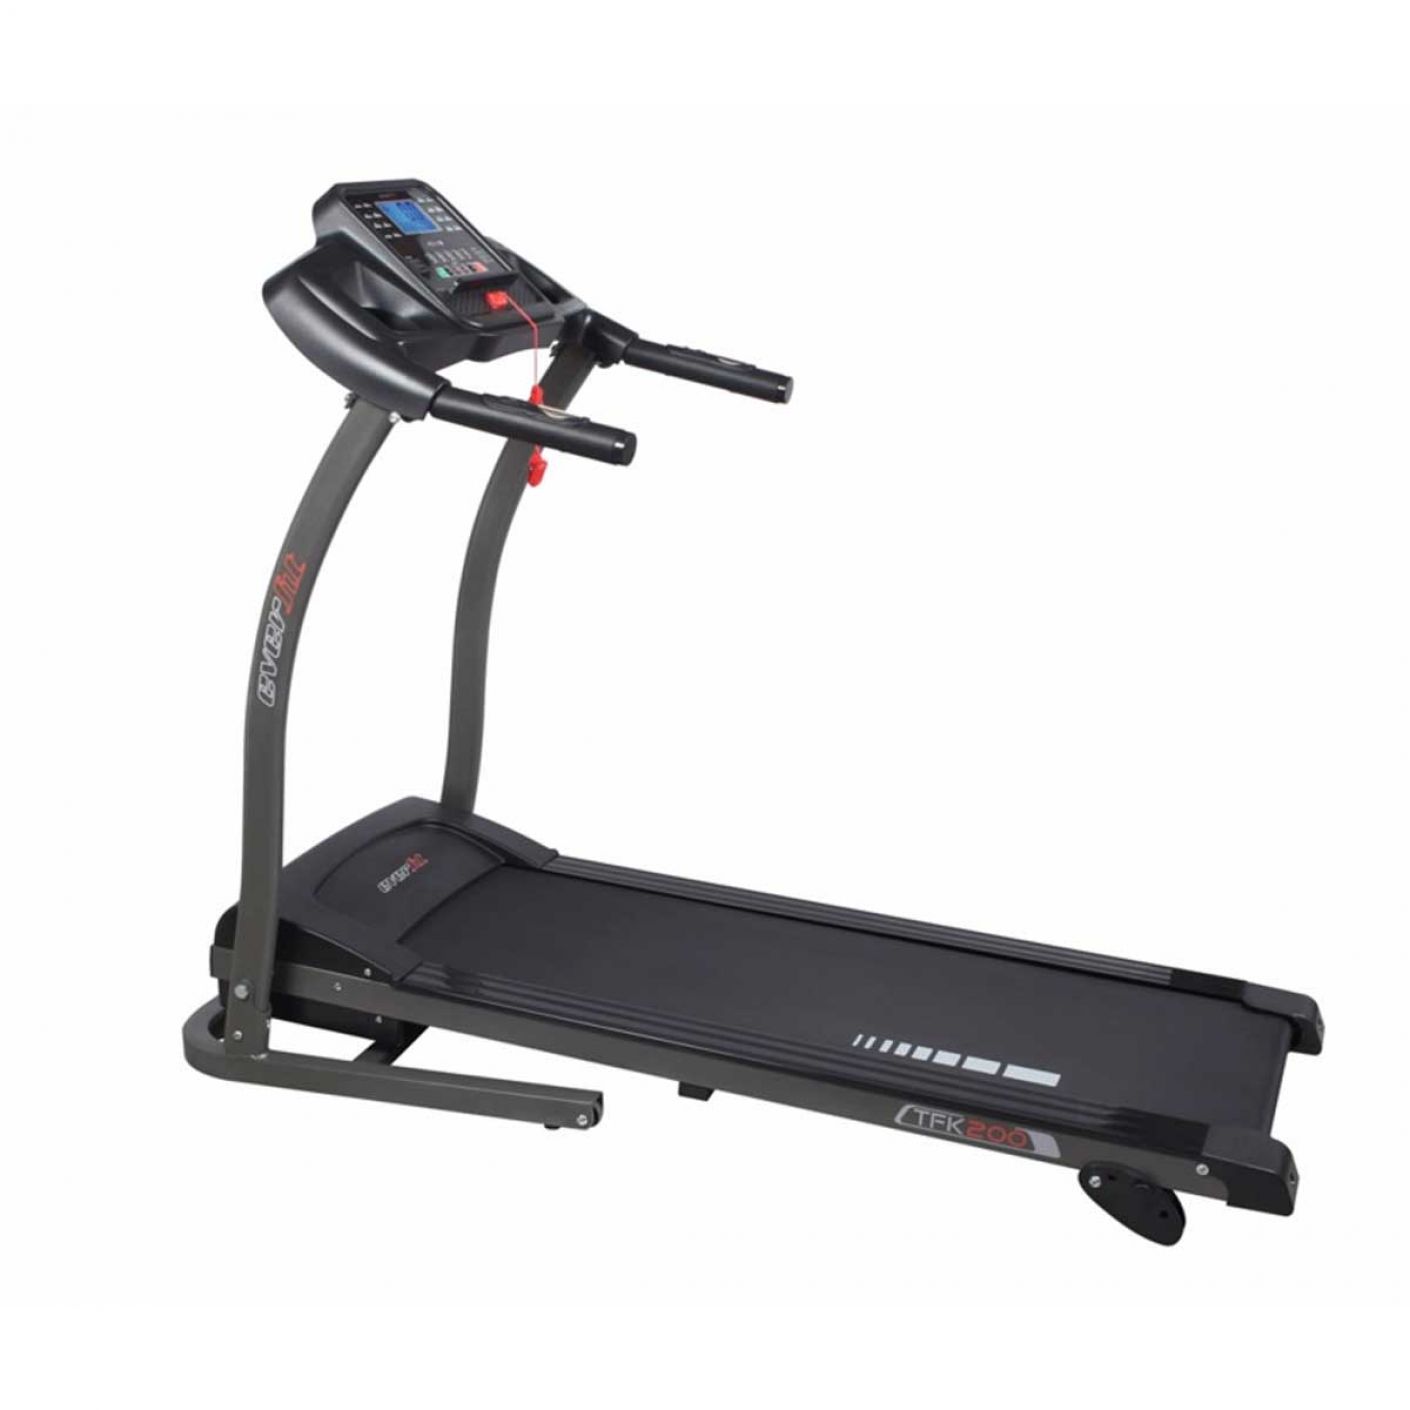 Everfit TFK-200 Motorized Treadmill with Manual Incline